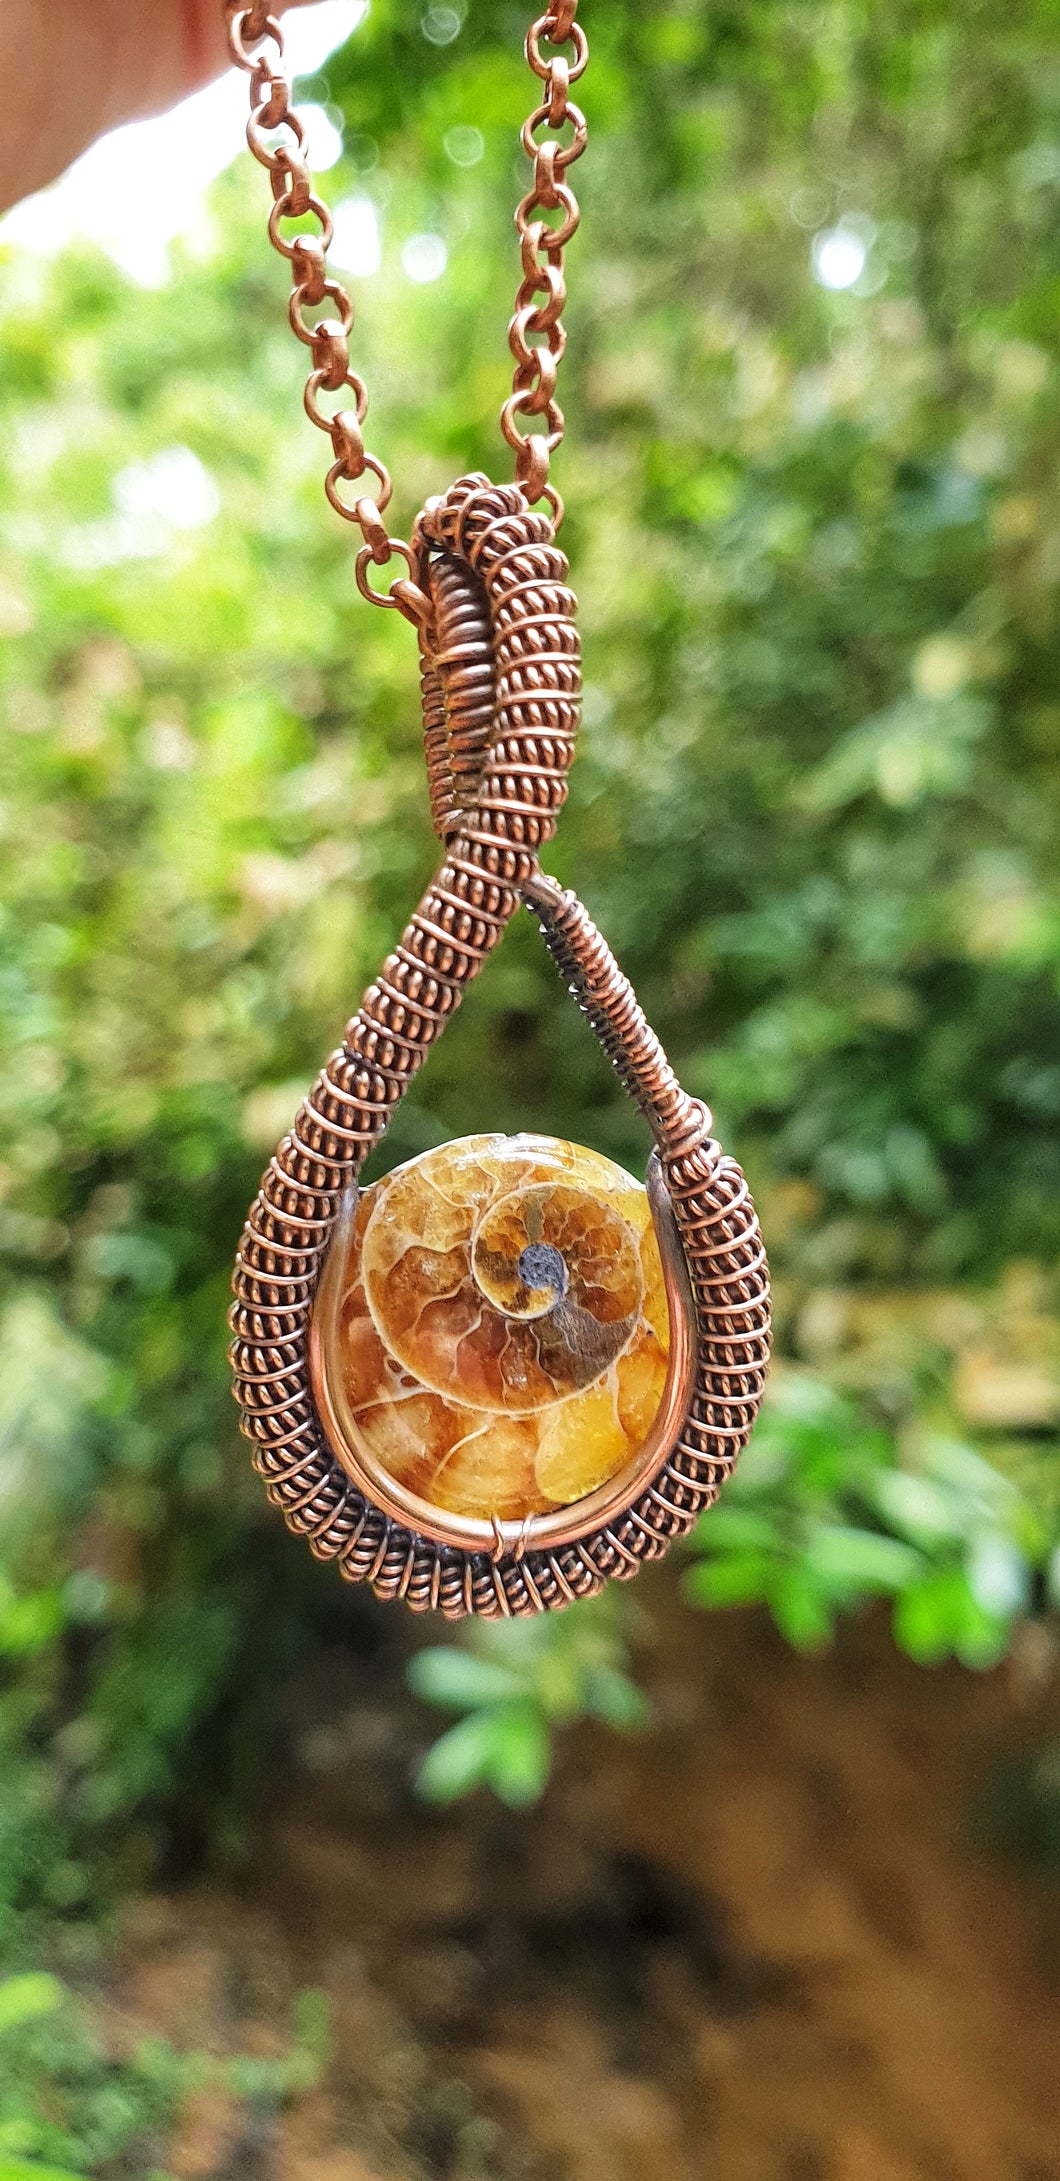 Ammonite Spiral Fossil Shell Pendant in Antiqued Copper Wire